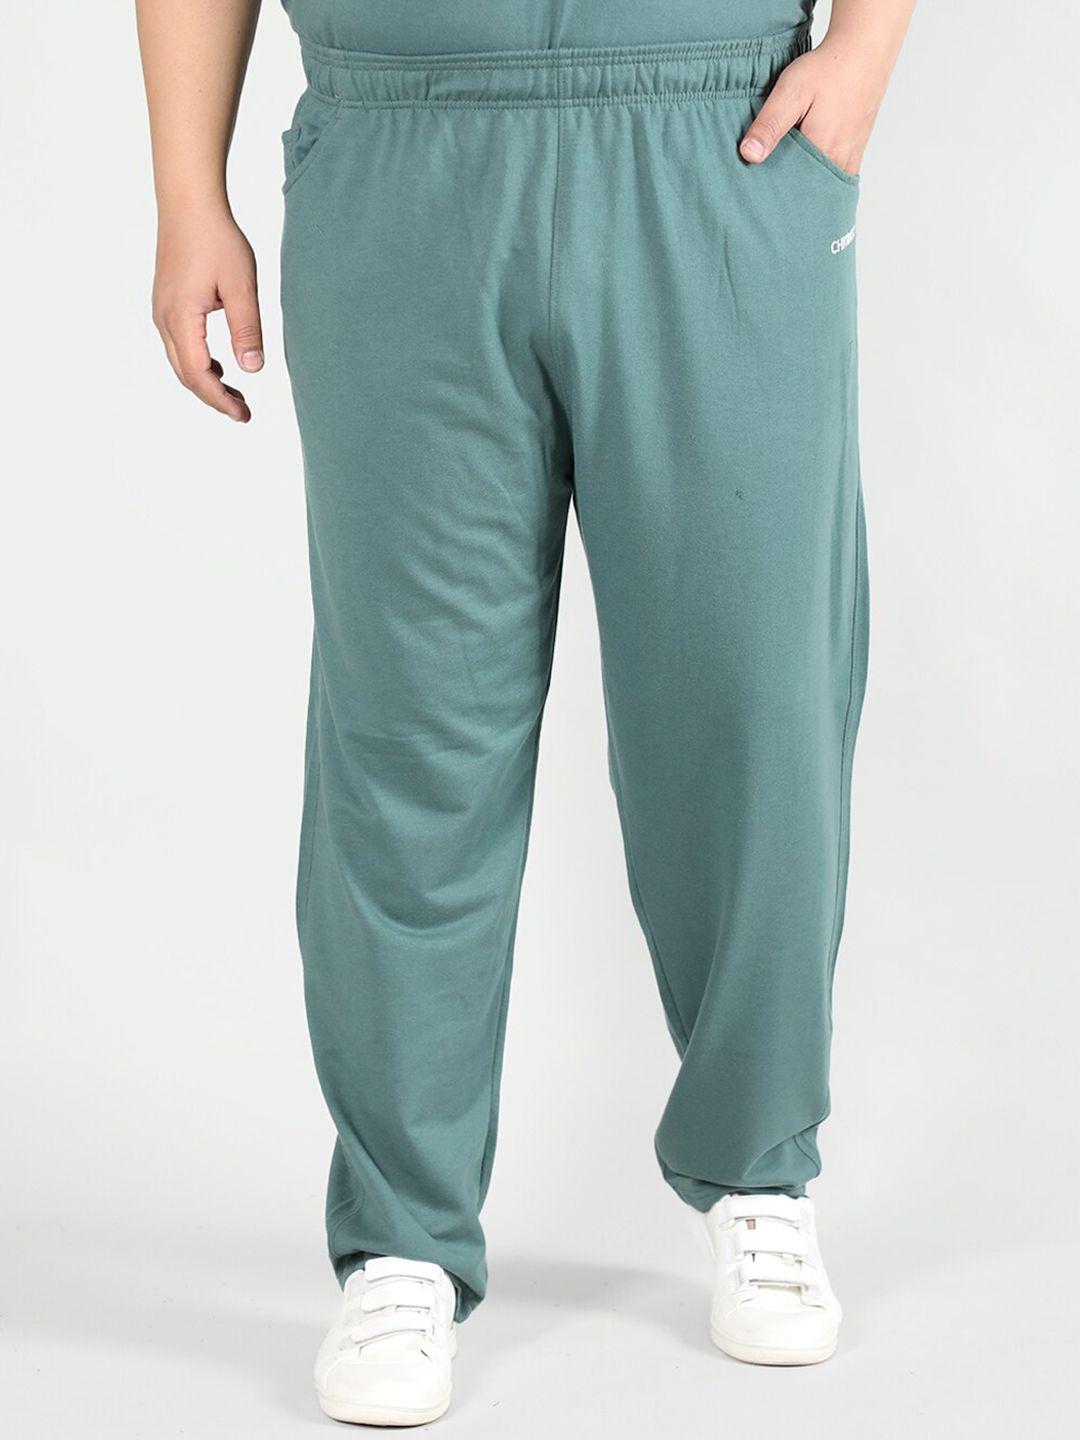 chkokko men plus size relaxed-fit gym track pants